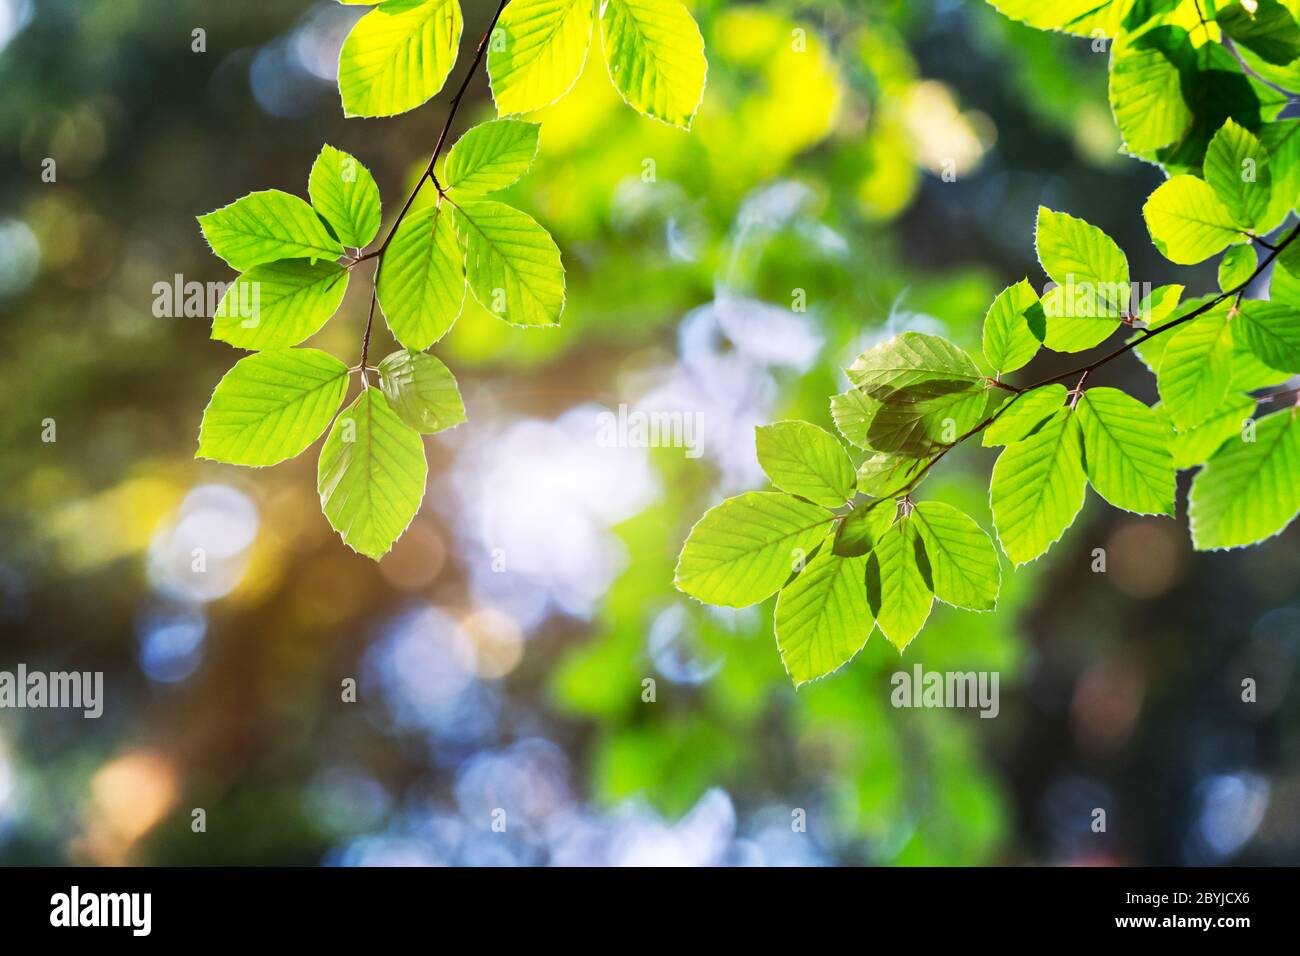 Closeup nature view of green beech leaf on spring twigs on blurred background in forest. Copyspace make using as natural green plants and ecology backdrop Stock Photo